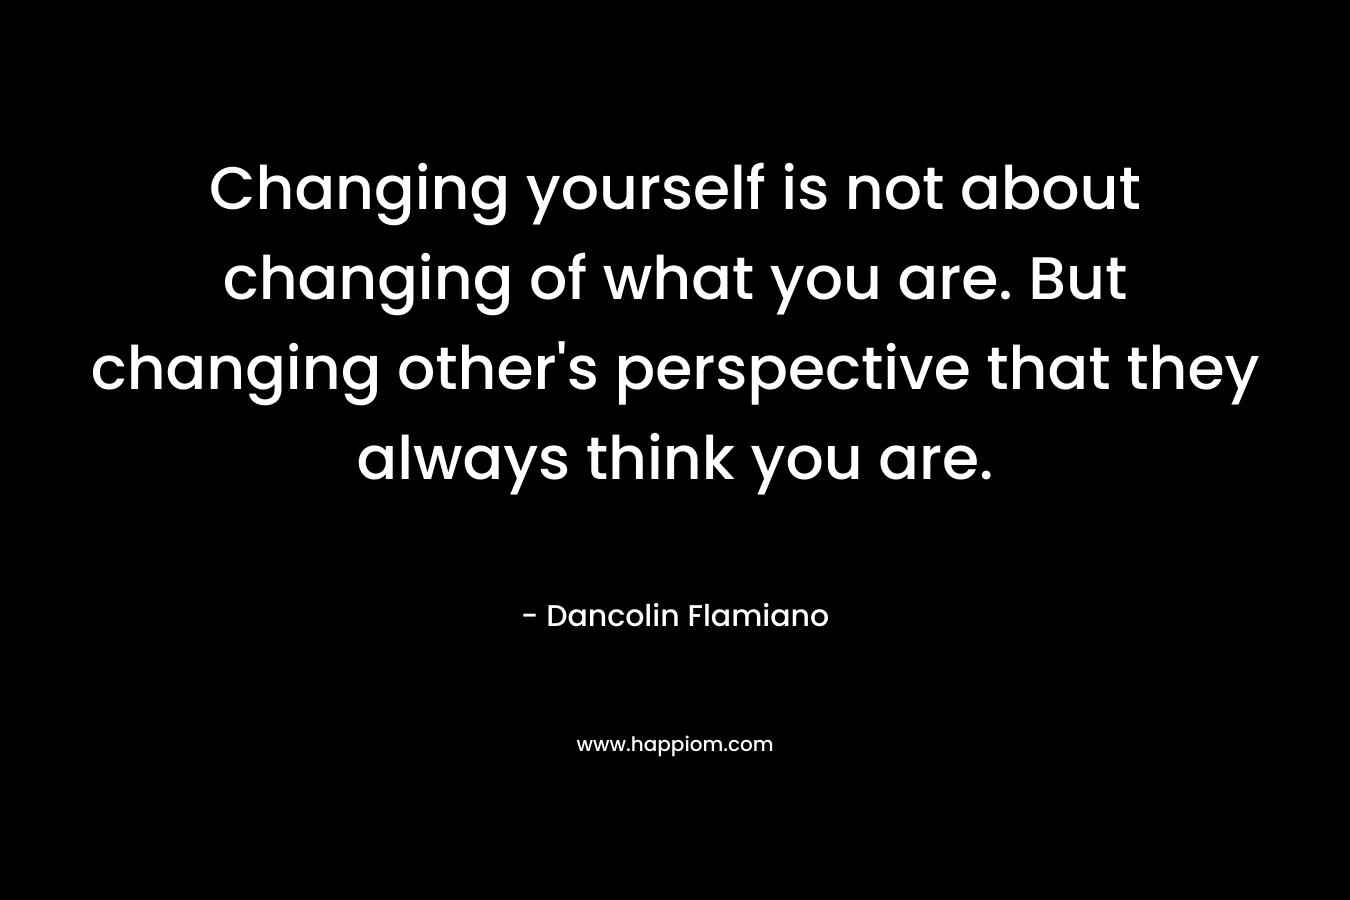 Changing yourself is not about changing of what you are. But changing other's perspective that they always think you are.